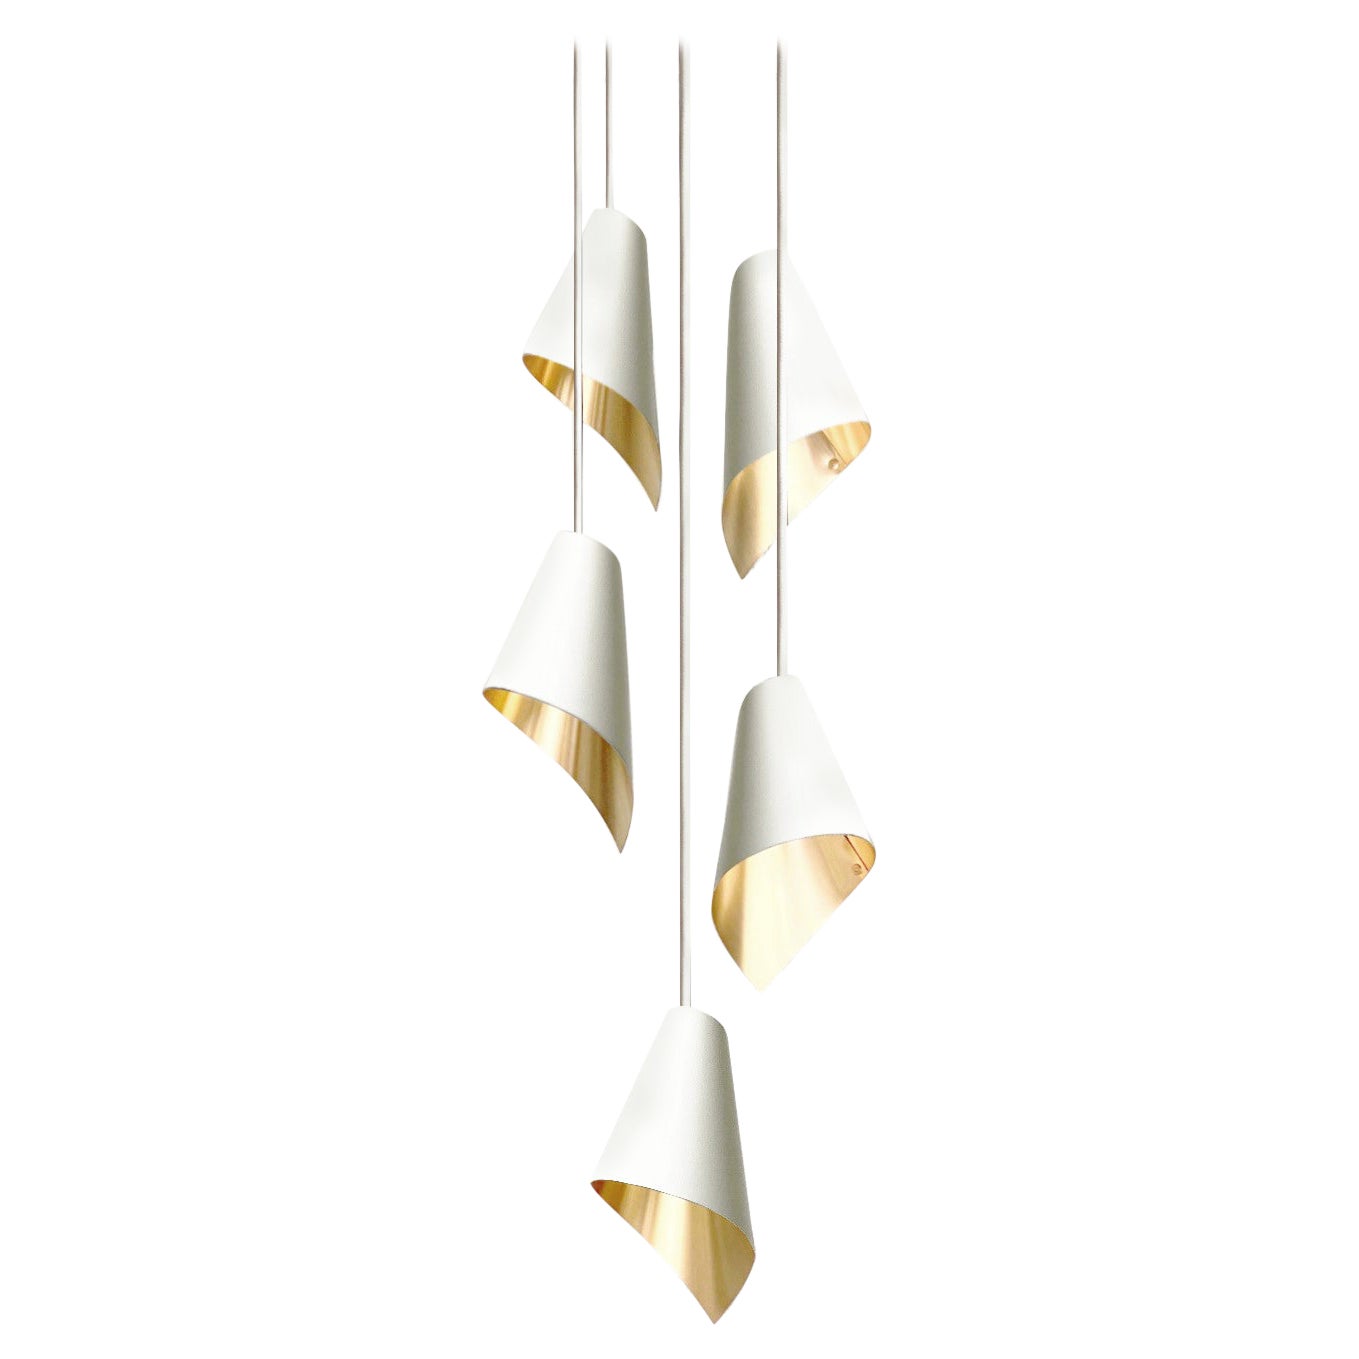 ARC 5 Modern Pendant Light Cascade in White and Brushed Brass, Made in Britain